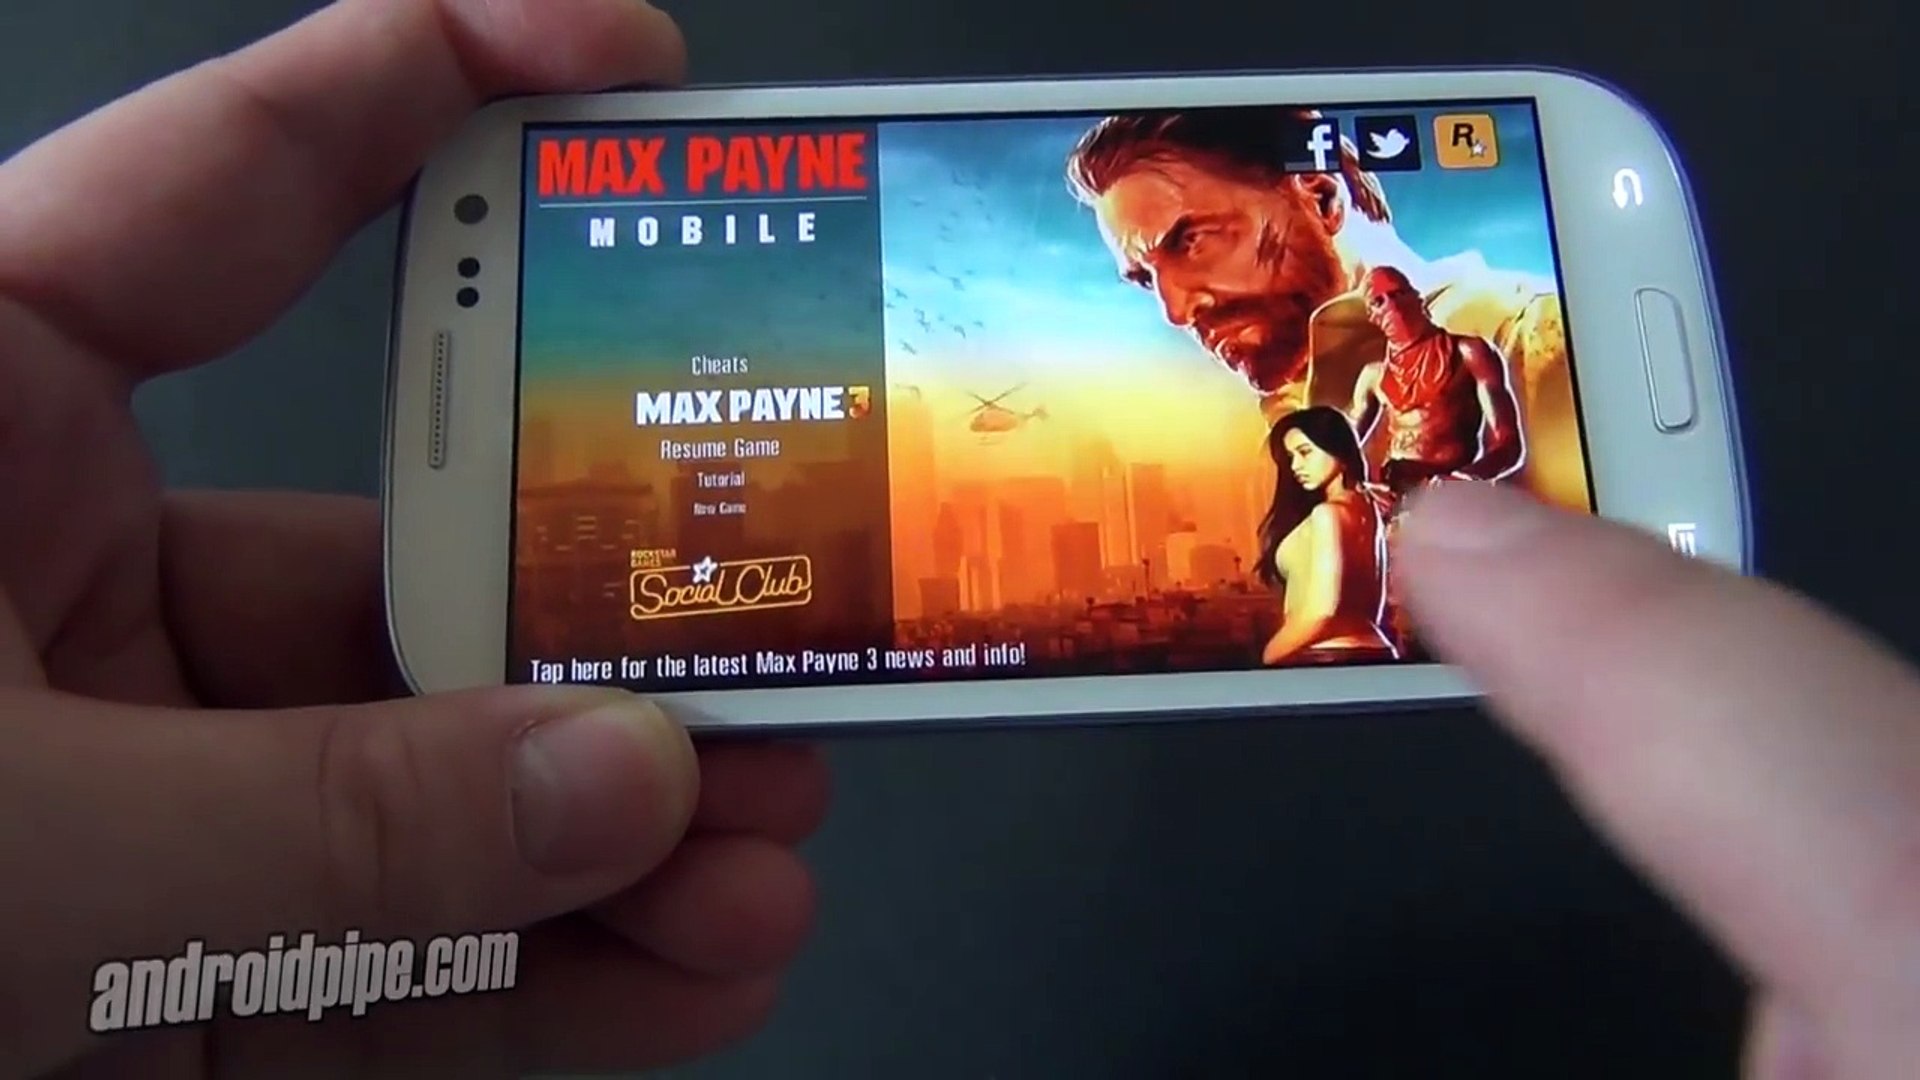 Max Payne Mobile Review (Android) - Samsung Galaxy S İ - AndroidPipe.com -  video Dailymotion